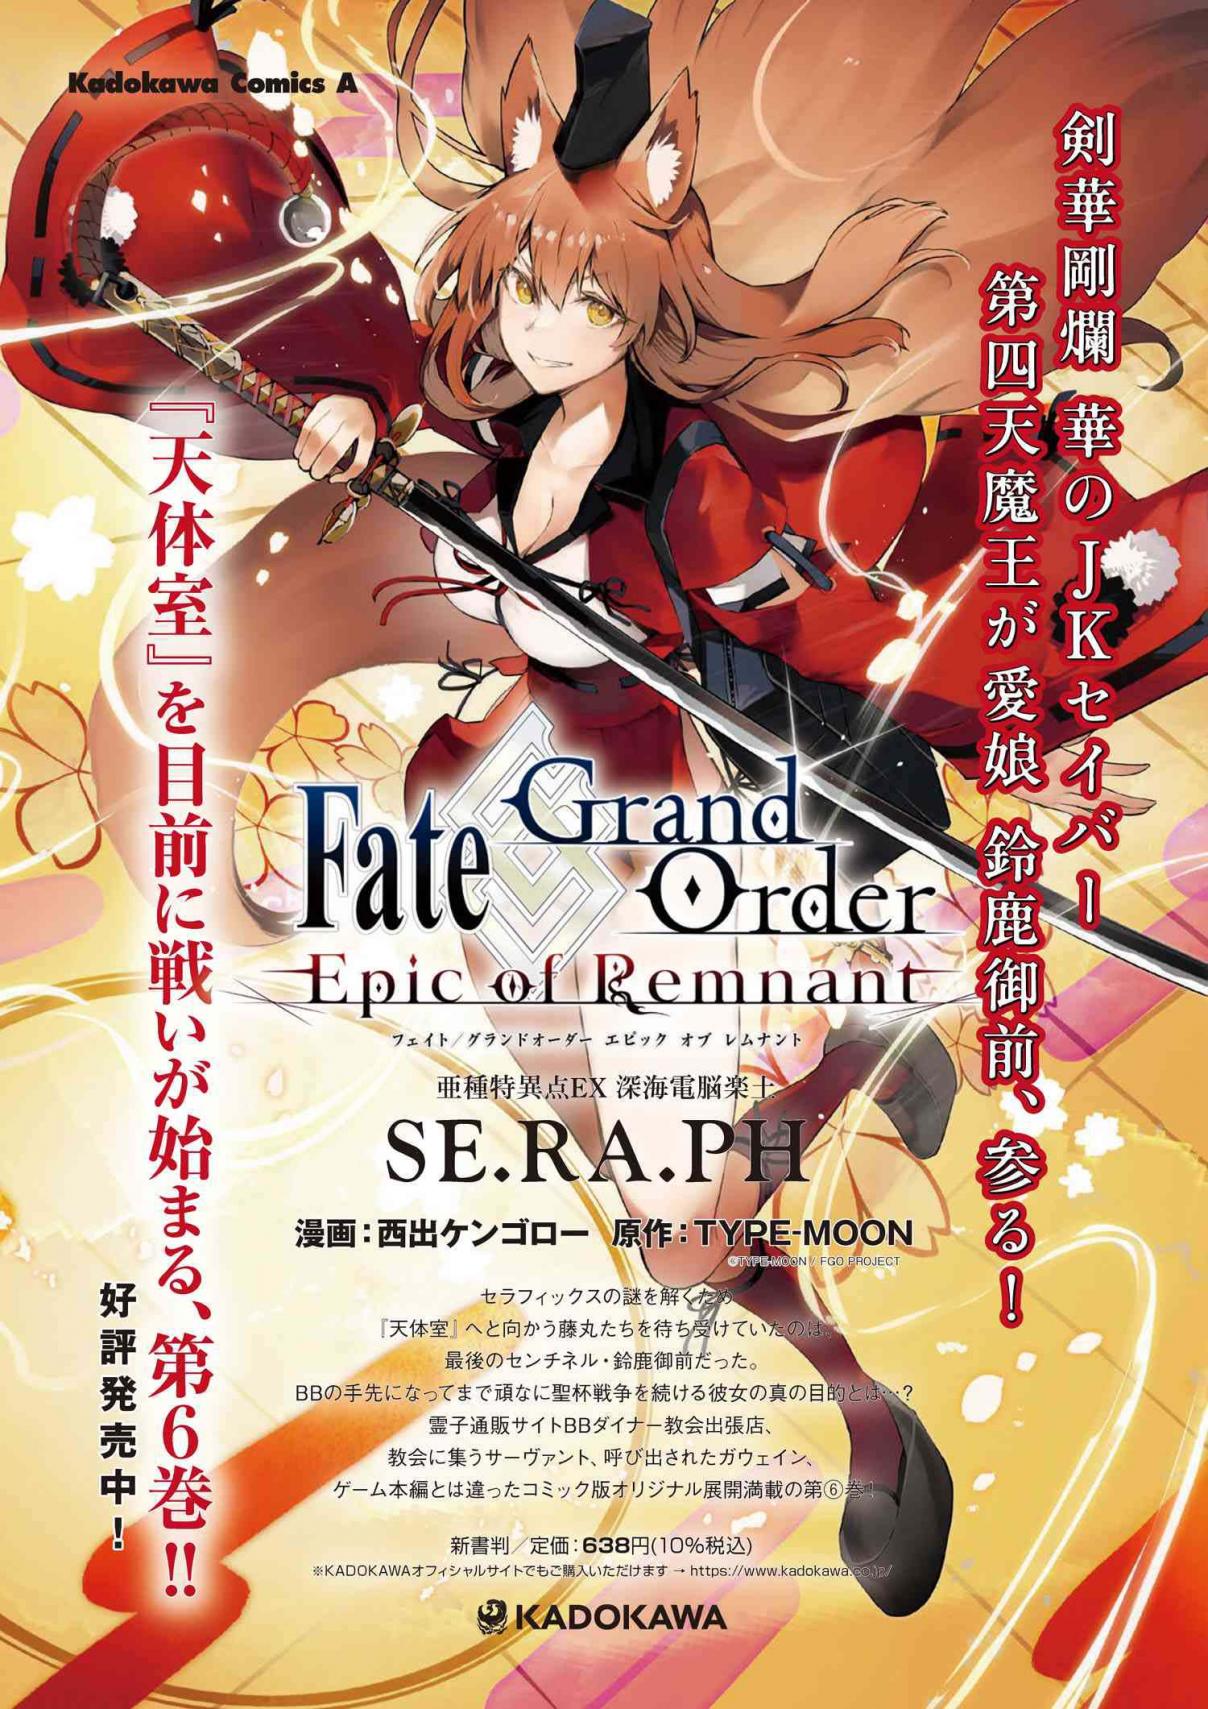 Fate/Grand Order -Epic of Remnant- Deep Sea Cyber-Paradise, SE.RA.PH 29.1